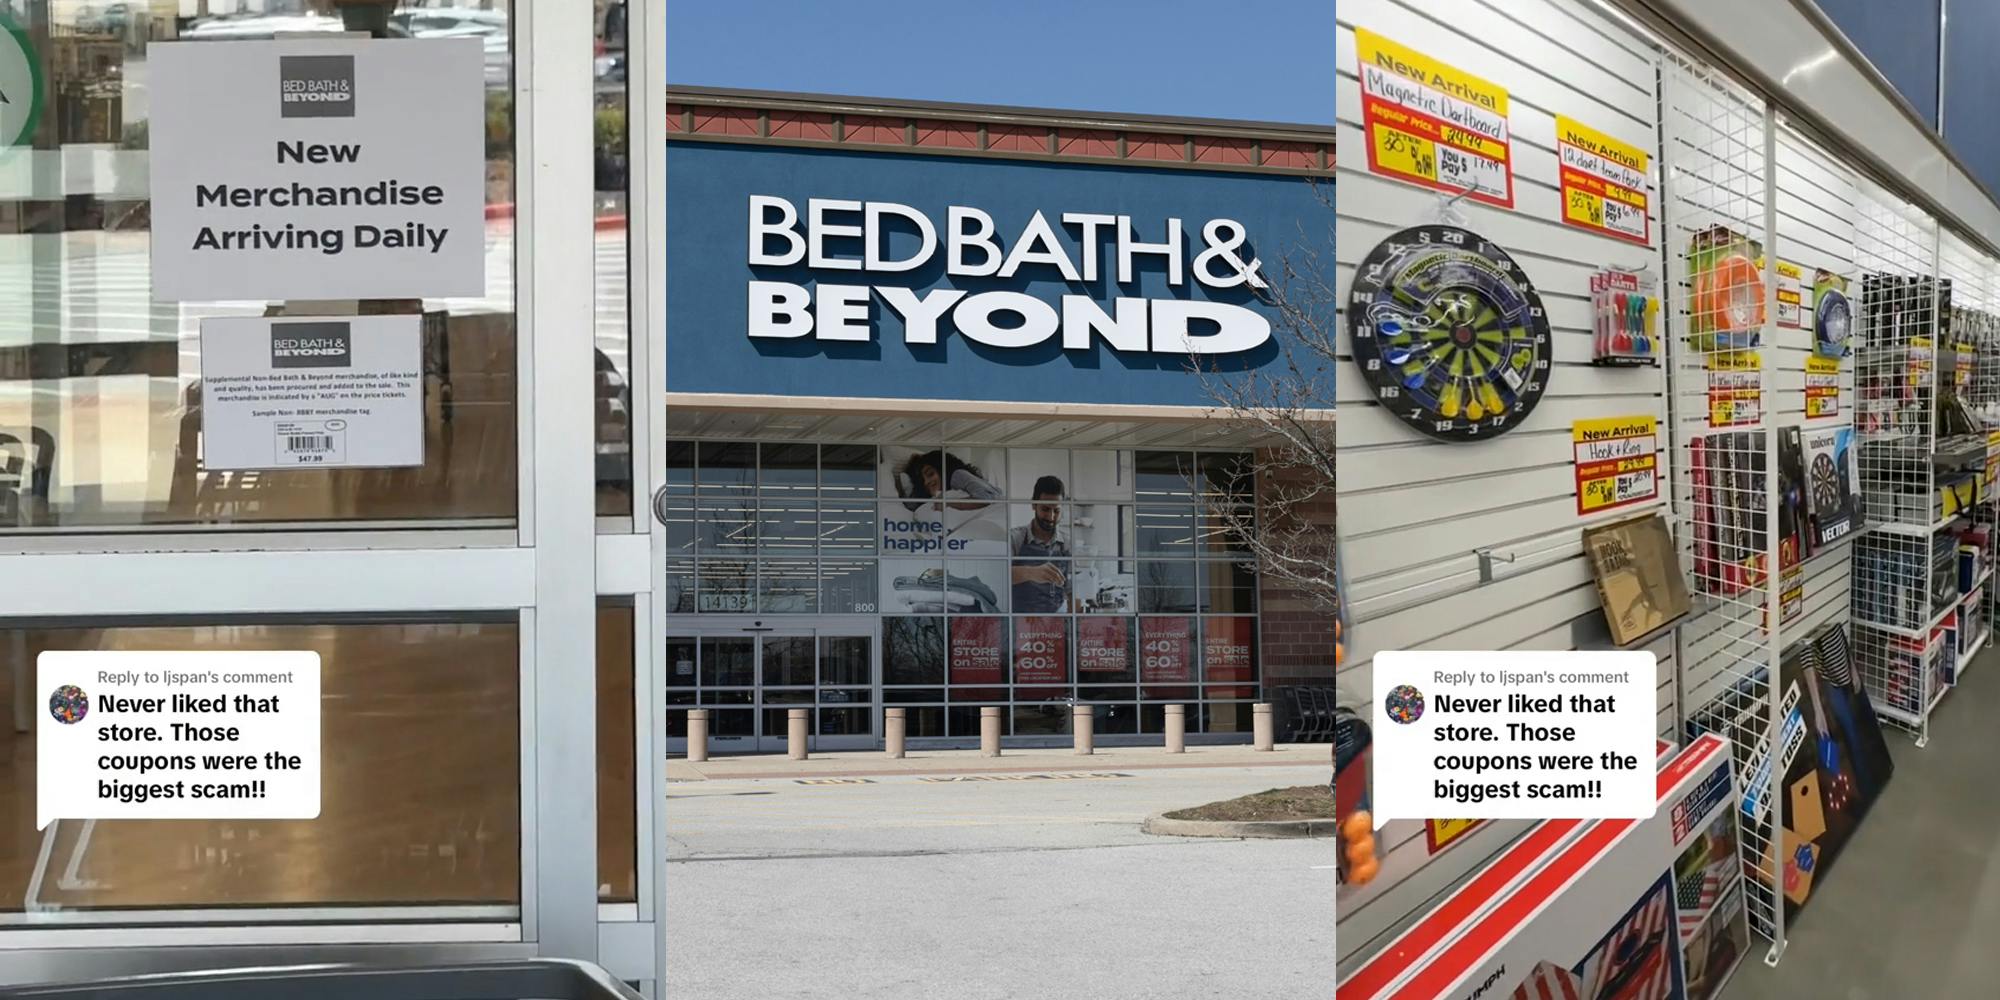 Bed Bath & Beyond sign on door with caption "Never liked that store. Those coupons were the biggest scam!!" (l) Bed Bath & Beyond building with sign (c) Bed Bath & Beyond interior with new arrivals with caption "Never liked that store. Those coupons were the biggest scam!!" (r)